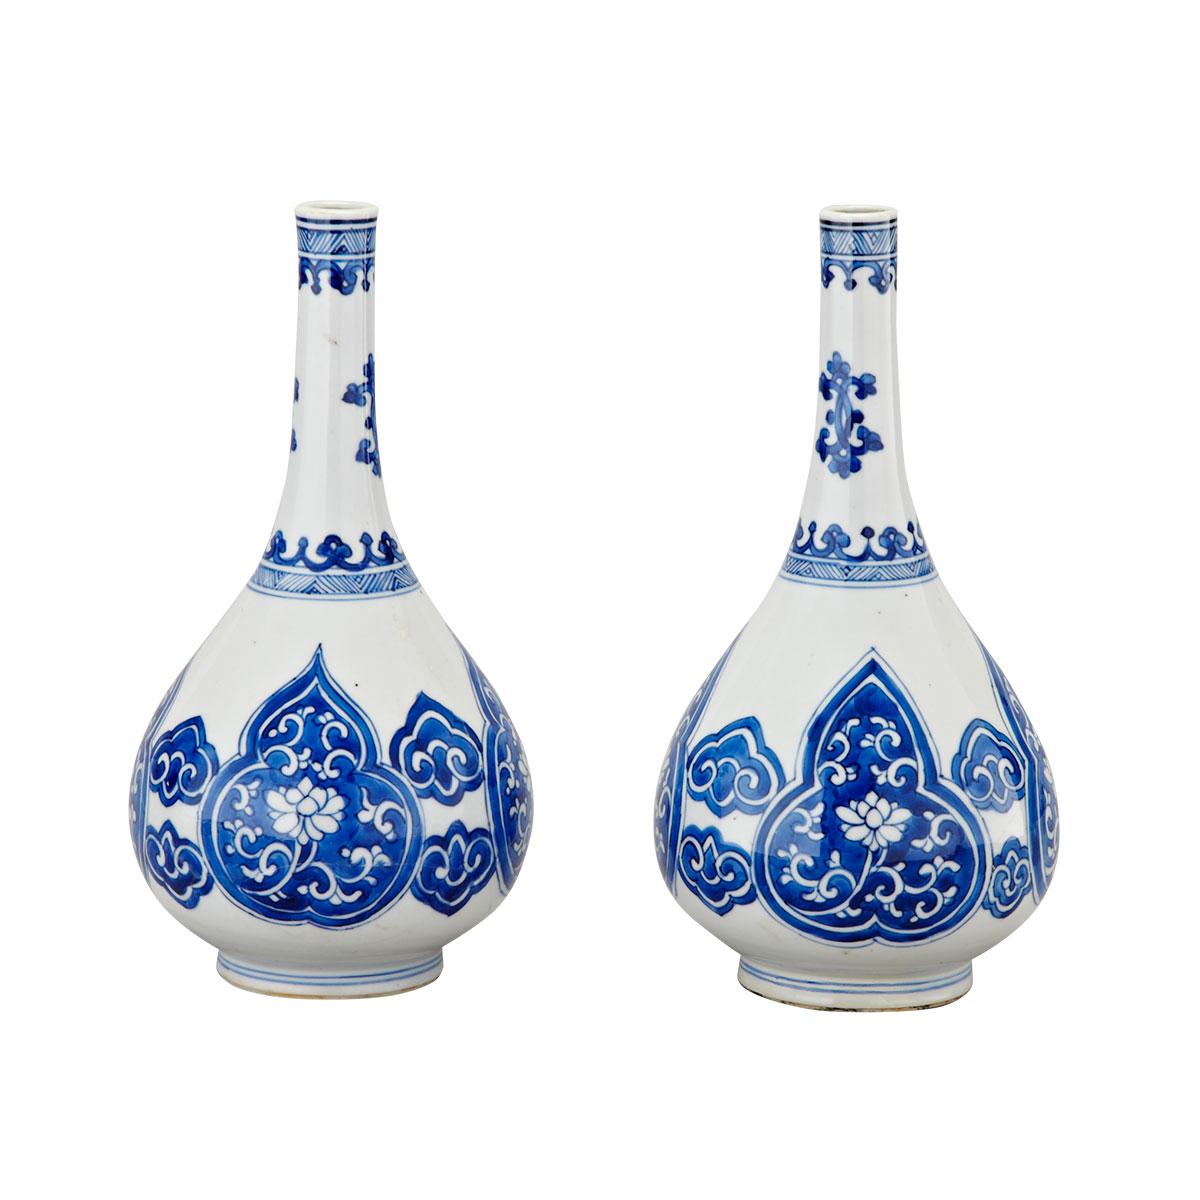 Pair of Blue and White Bottle Vases, Kangxi Period (1662-1722)